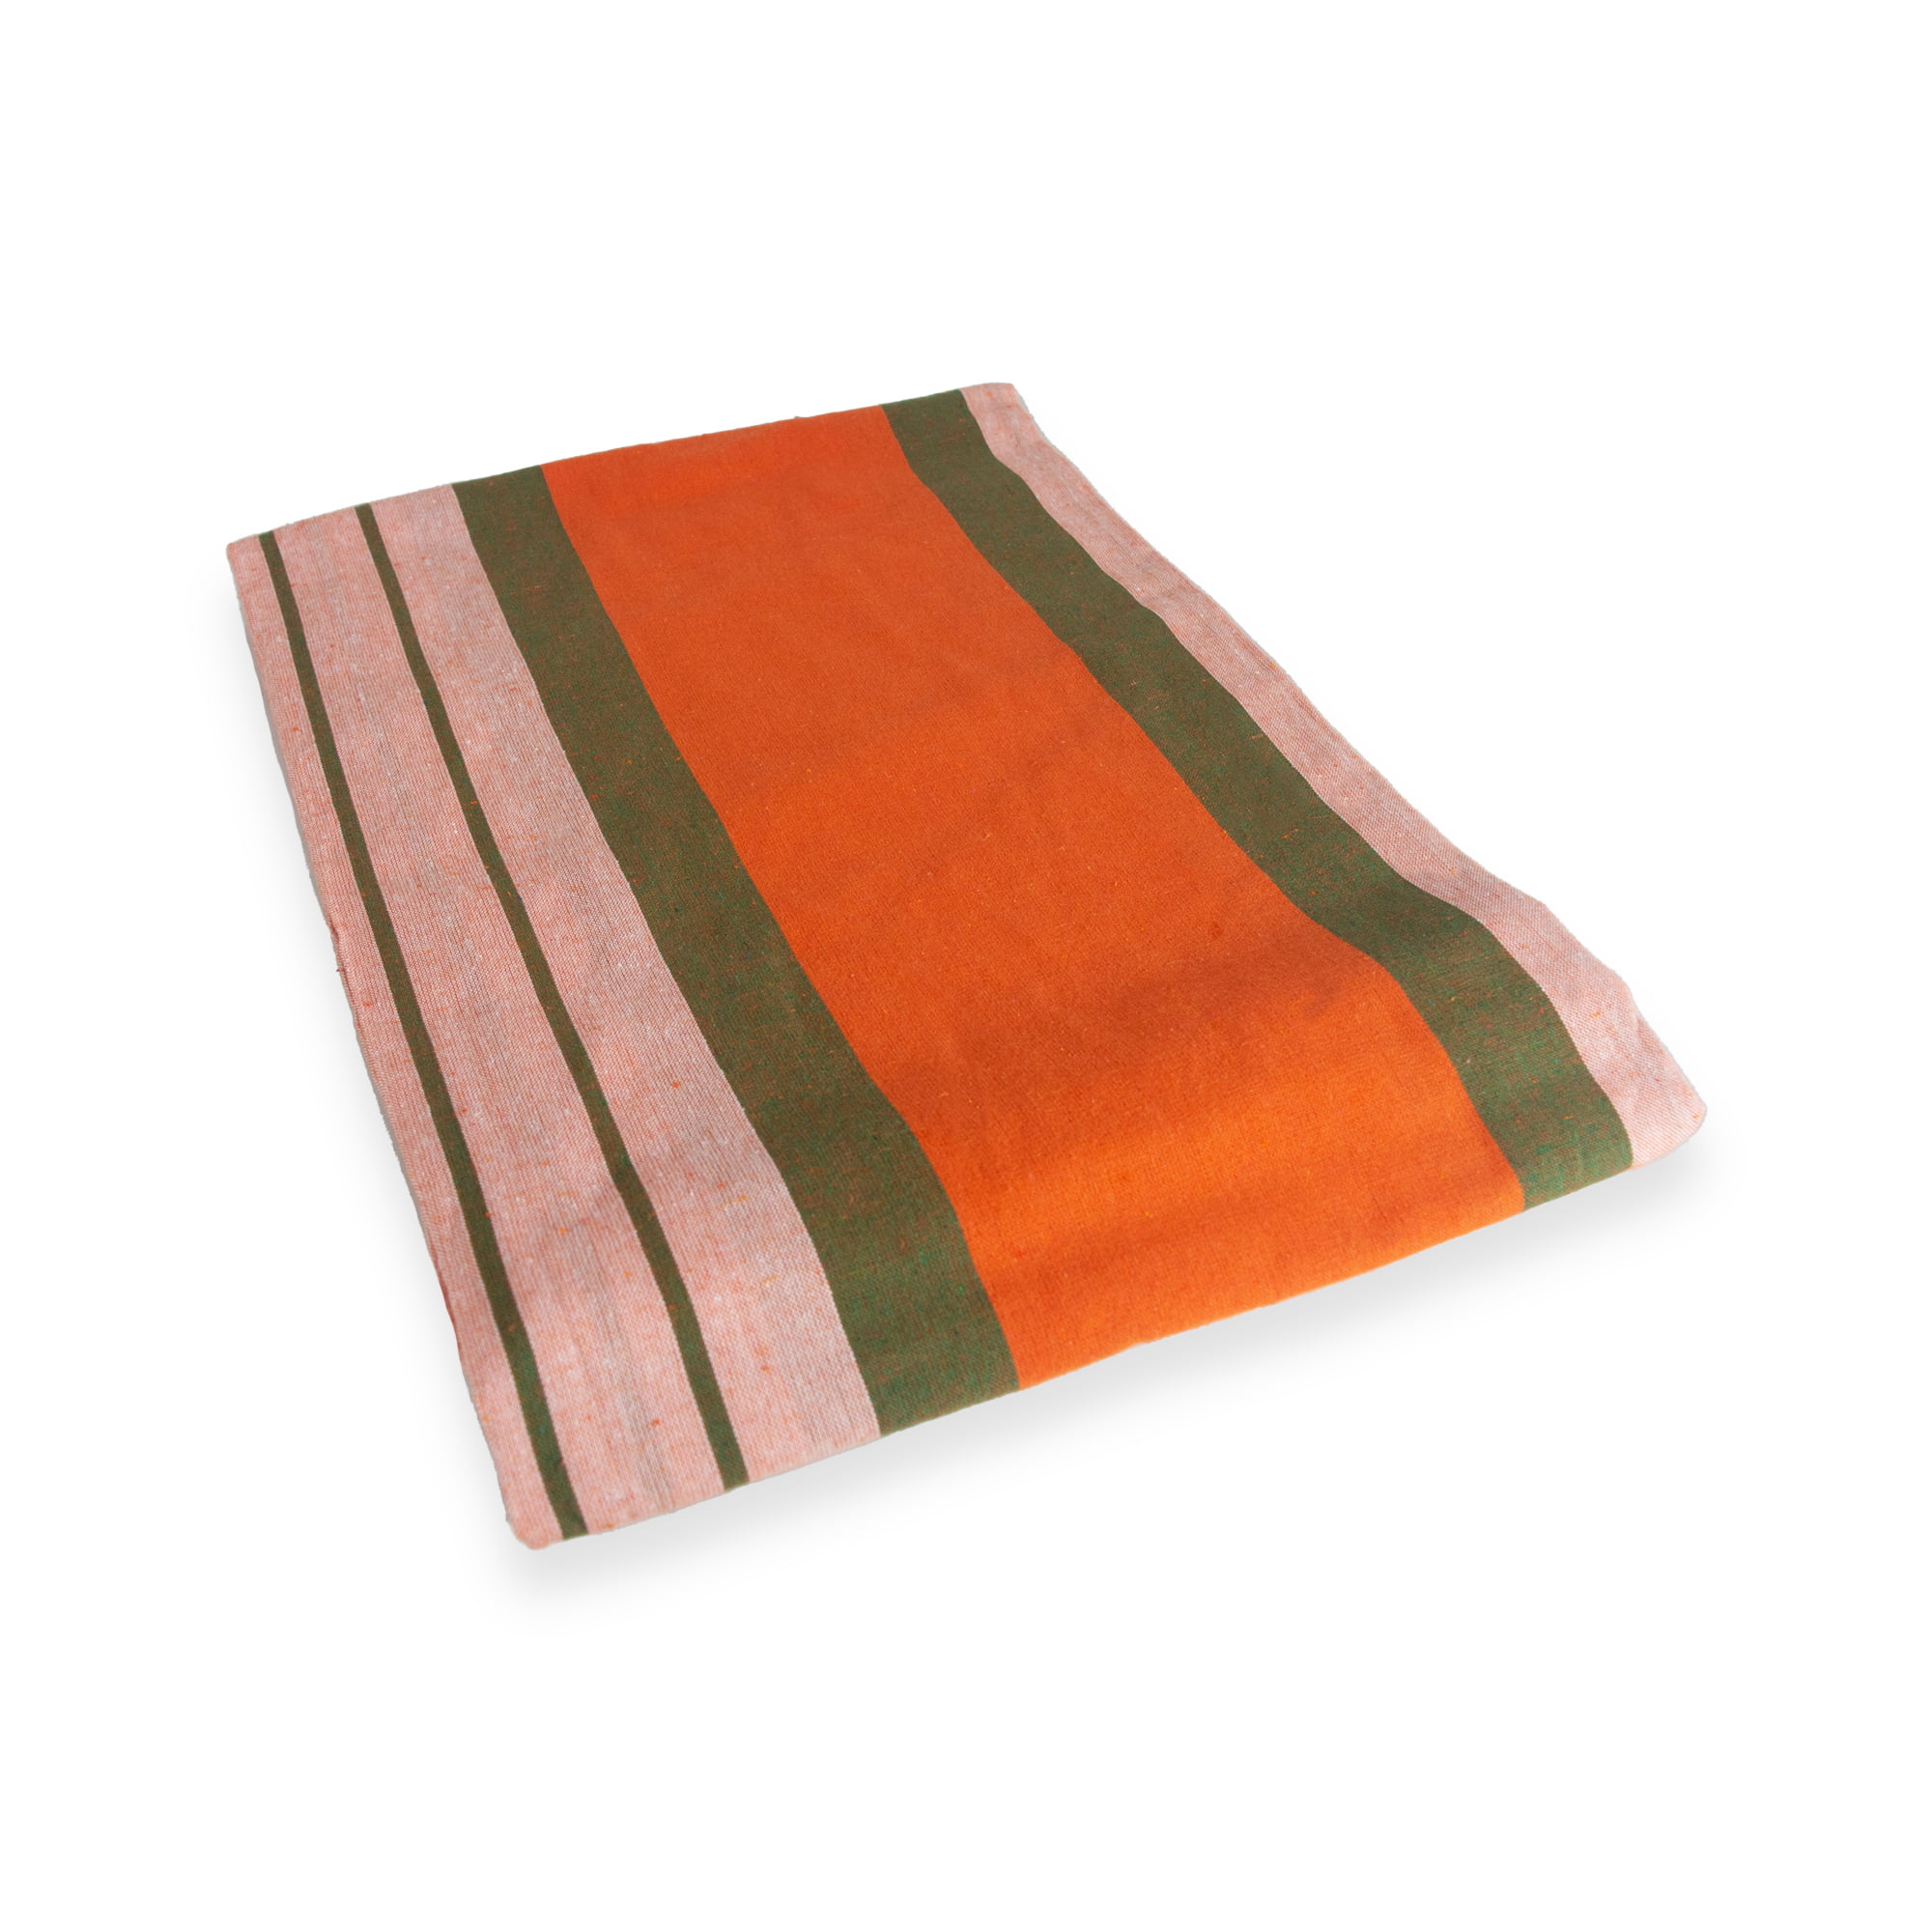 Orange Handloom Cotton Bed Sheets 7.5x7.5 (Feet) for King, Queen, Super King, California King Beds